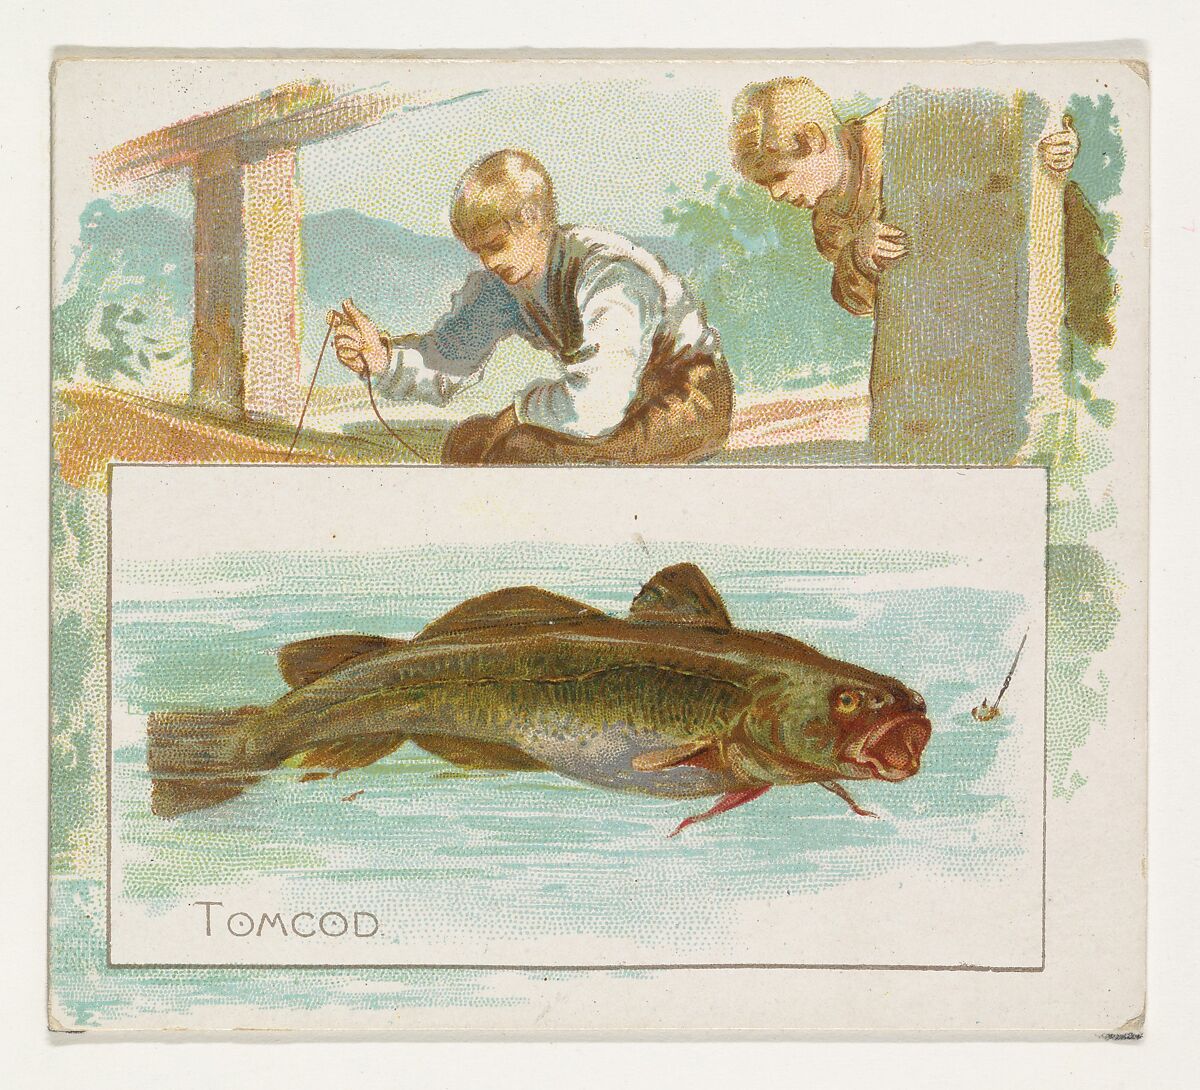 Tomcod, from Fish from American Waters series (N39) for Allen & Ginter Cigarettes, Issued by Allen &amp; Ginter (American, Richmond, Virginia), Commercial color lithograph 